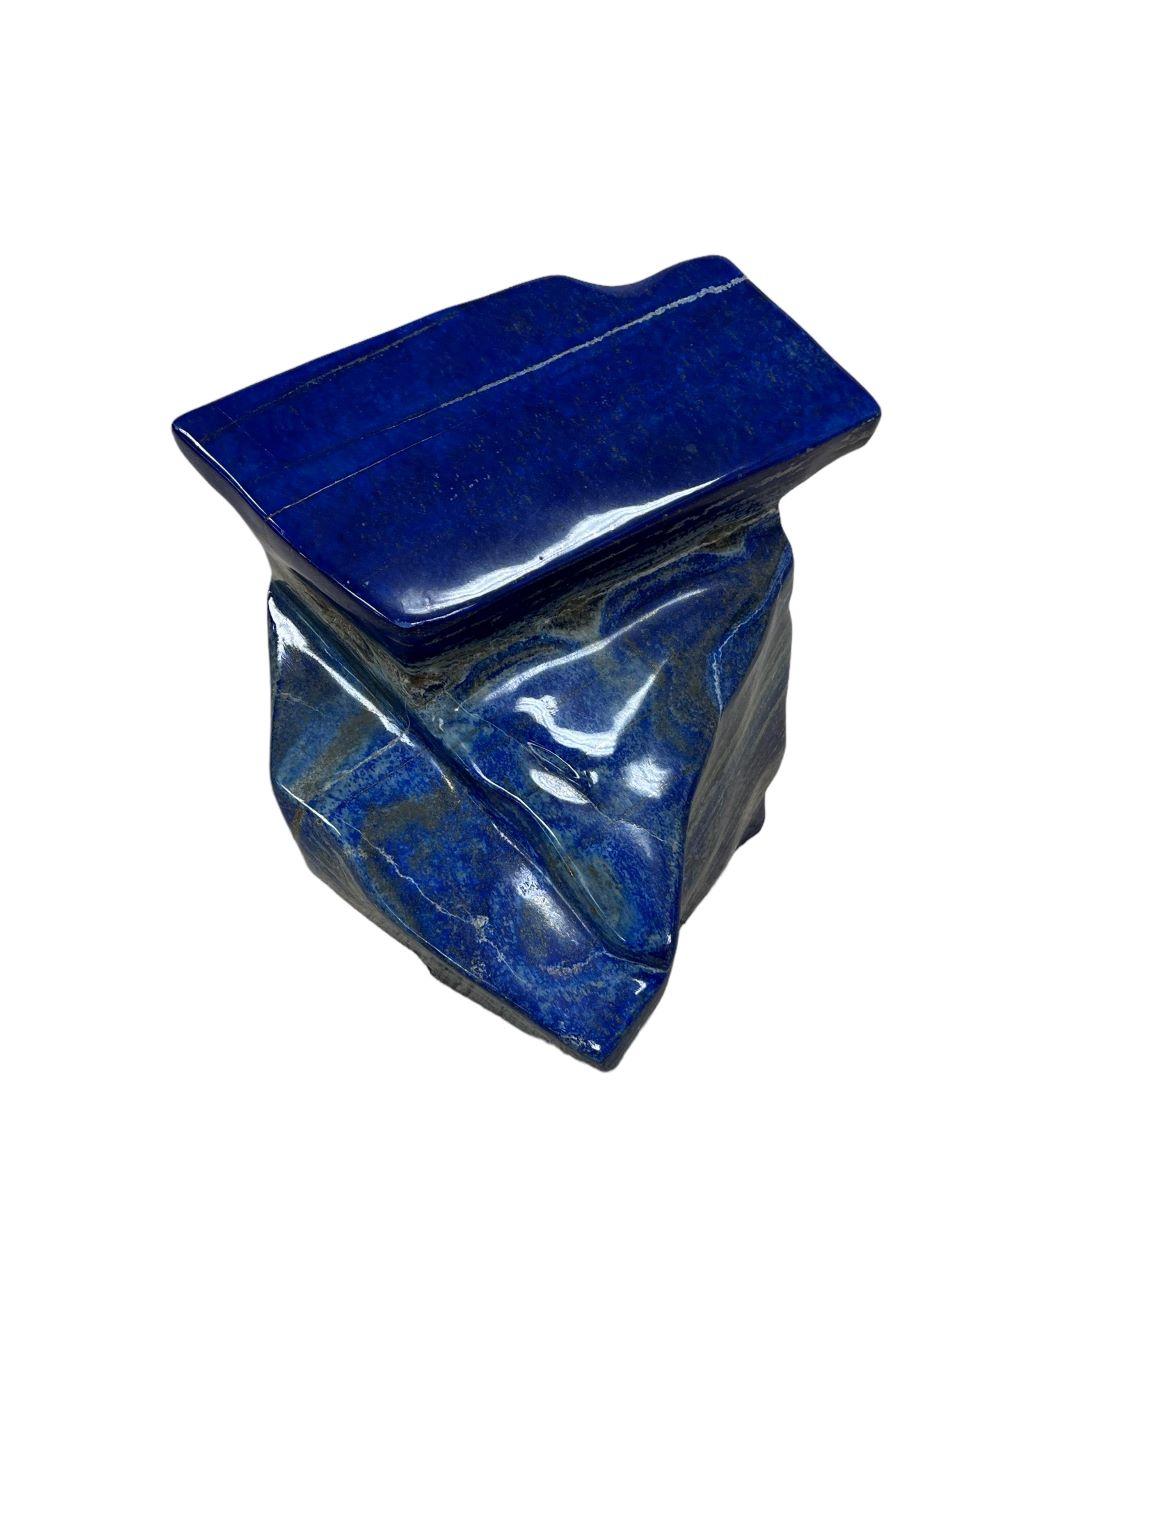 Beautiful hand-polished vintage lapis. This specimen has rich, electric-royal blue color. Dimensions 12 inches wide by 11 inches high by 11 deep. Weight is 56.6 pounds
Lapis is a powerful crystal for activating the higher mind and enhancing